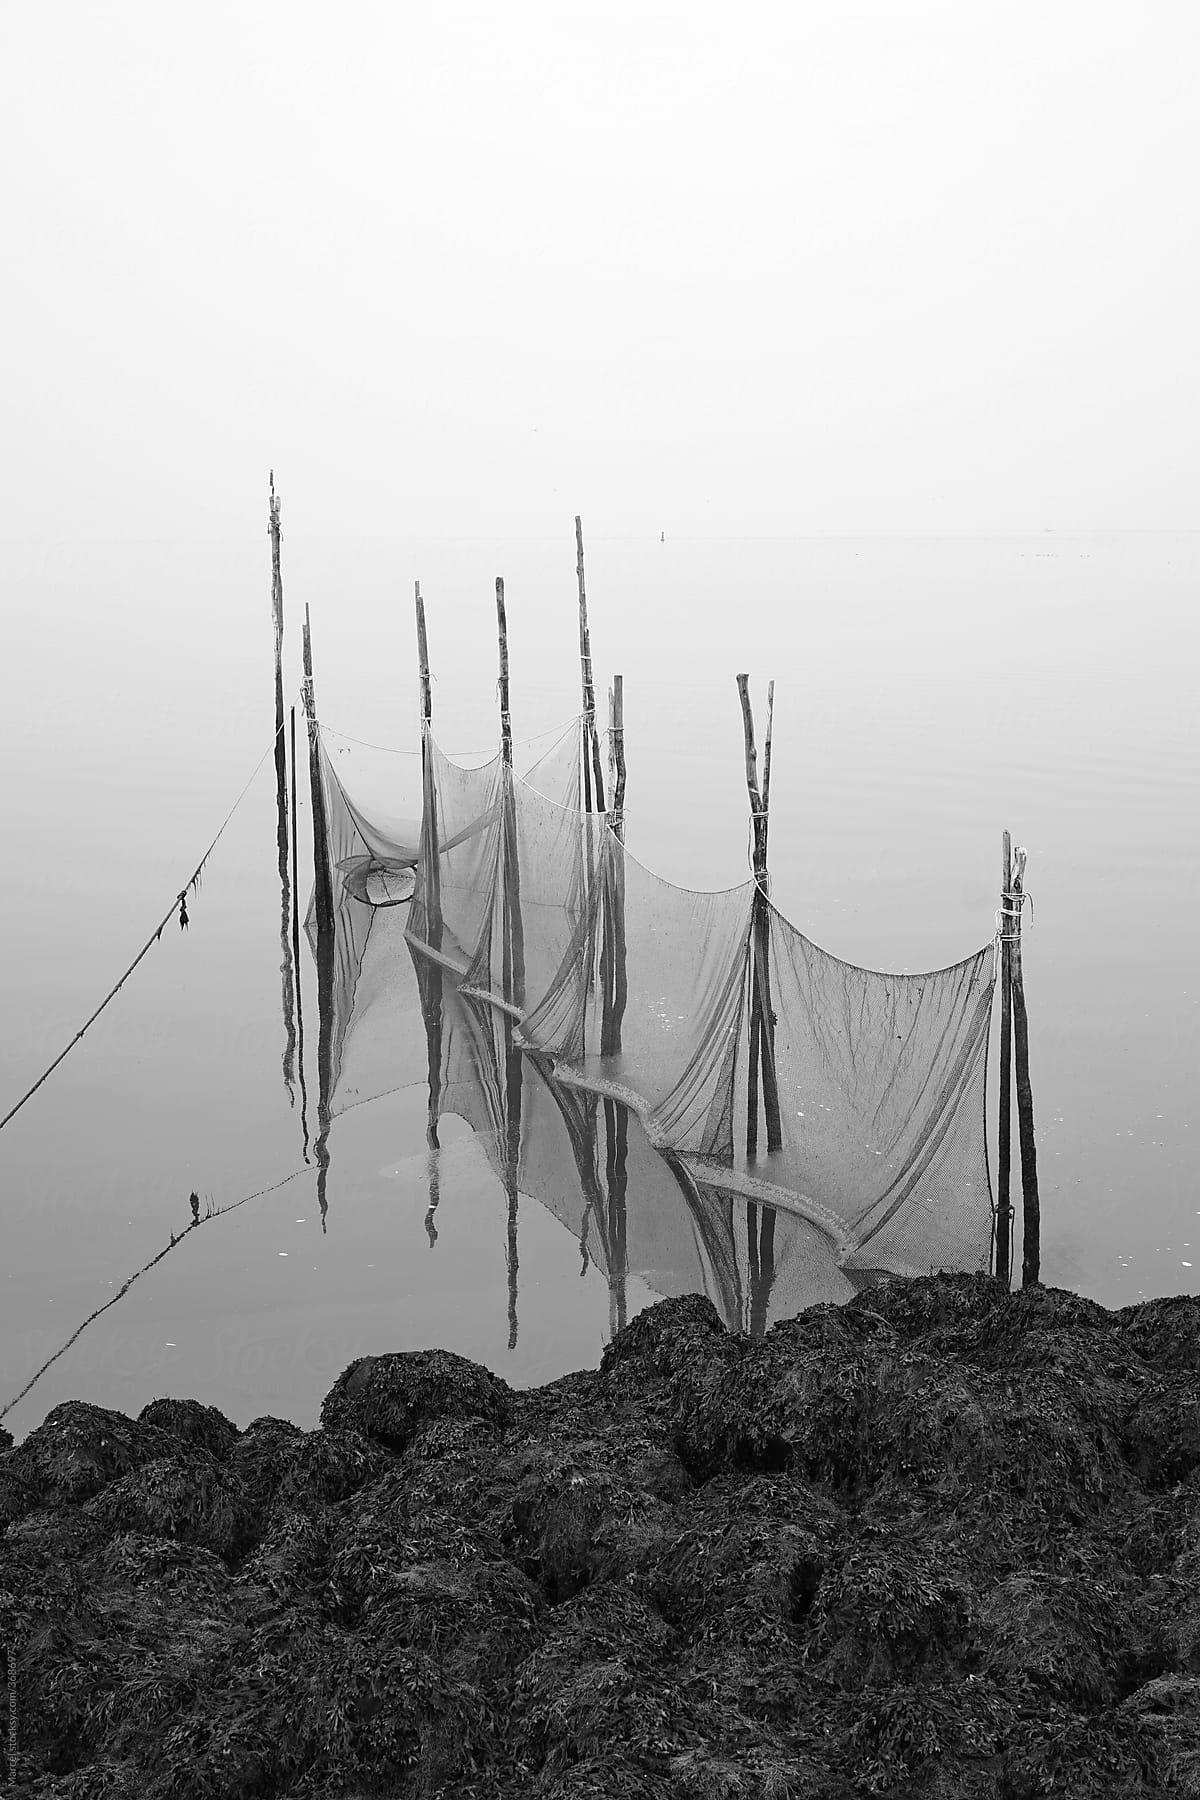 Fishing nets on poles, standing in the sea